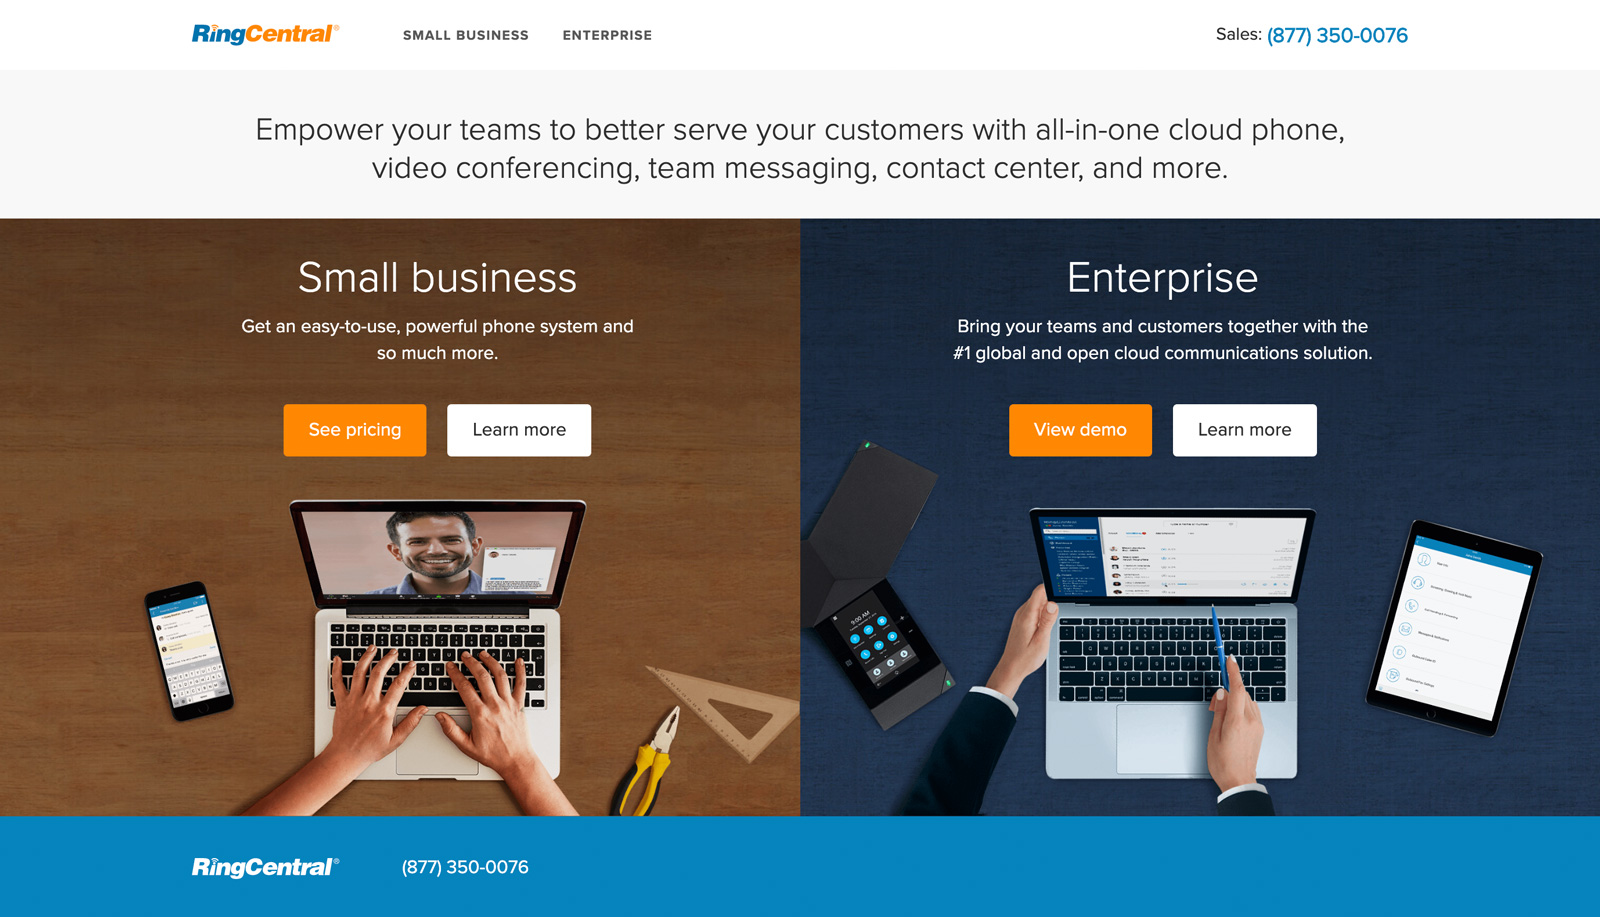 RingCentral's two-product homepage